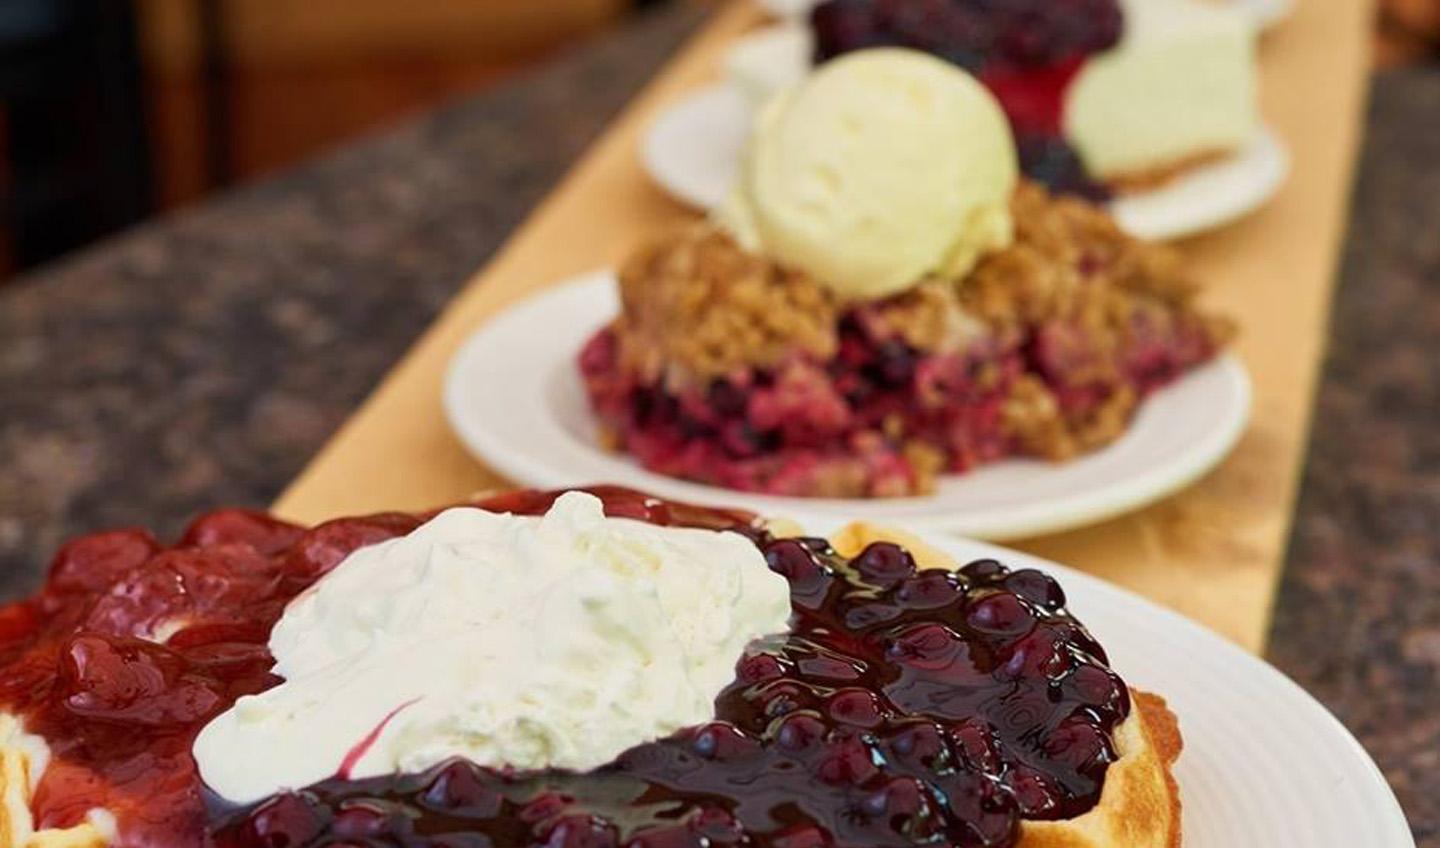 Berry-picking and pie tastings at Berry Farm